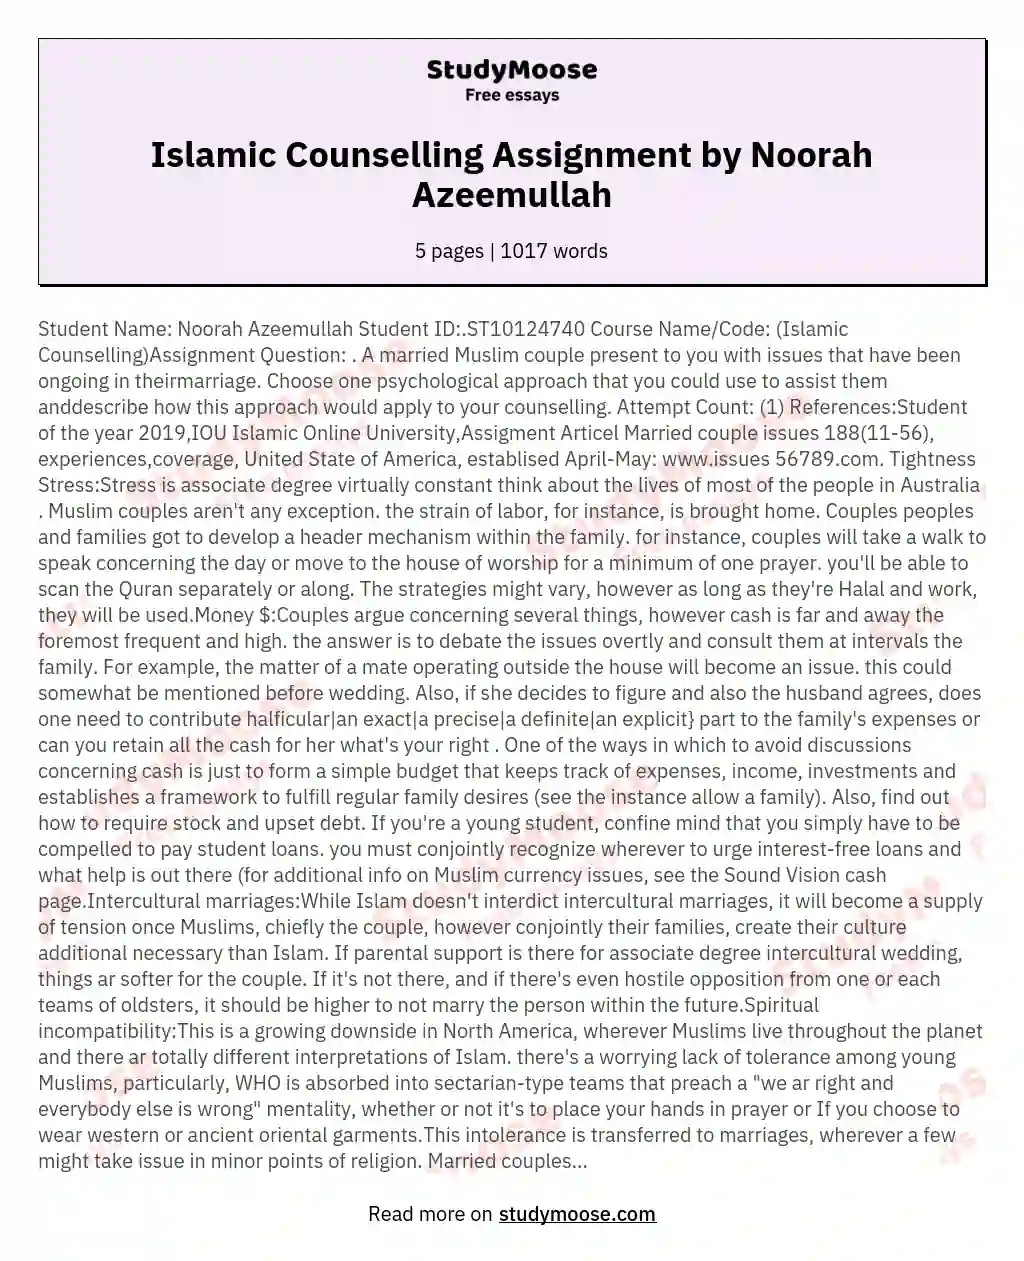 Student Name Noorah Azeemullah Student IDST10124740 Course NameCode Islamic CounsellingAssignment Question